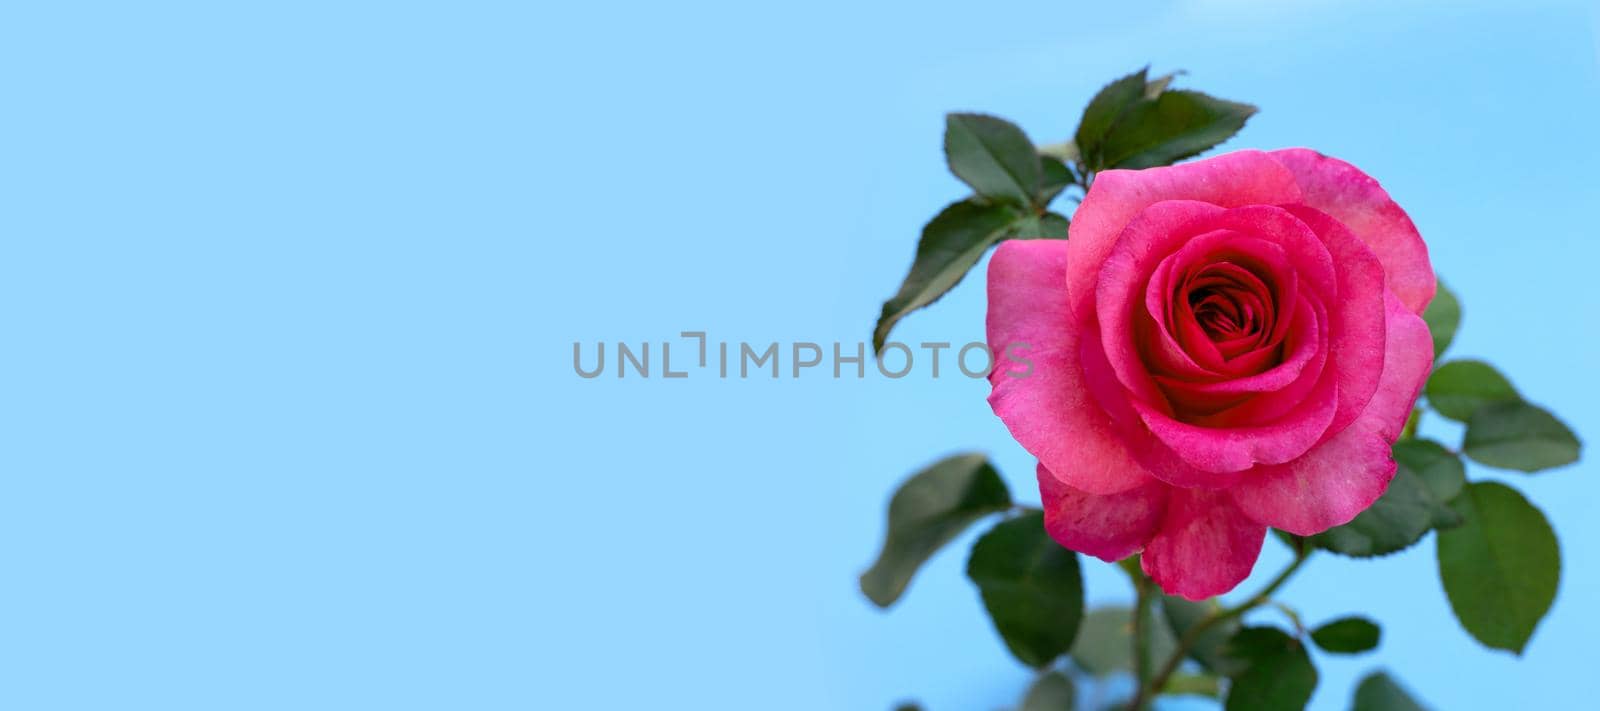 Rose on blue background. Valentine's day concept. by Bowonpat